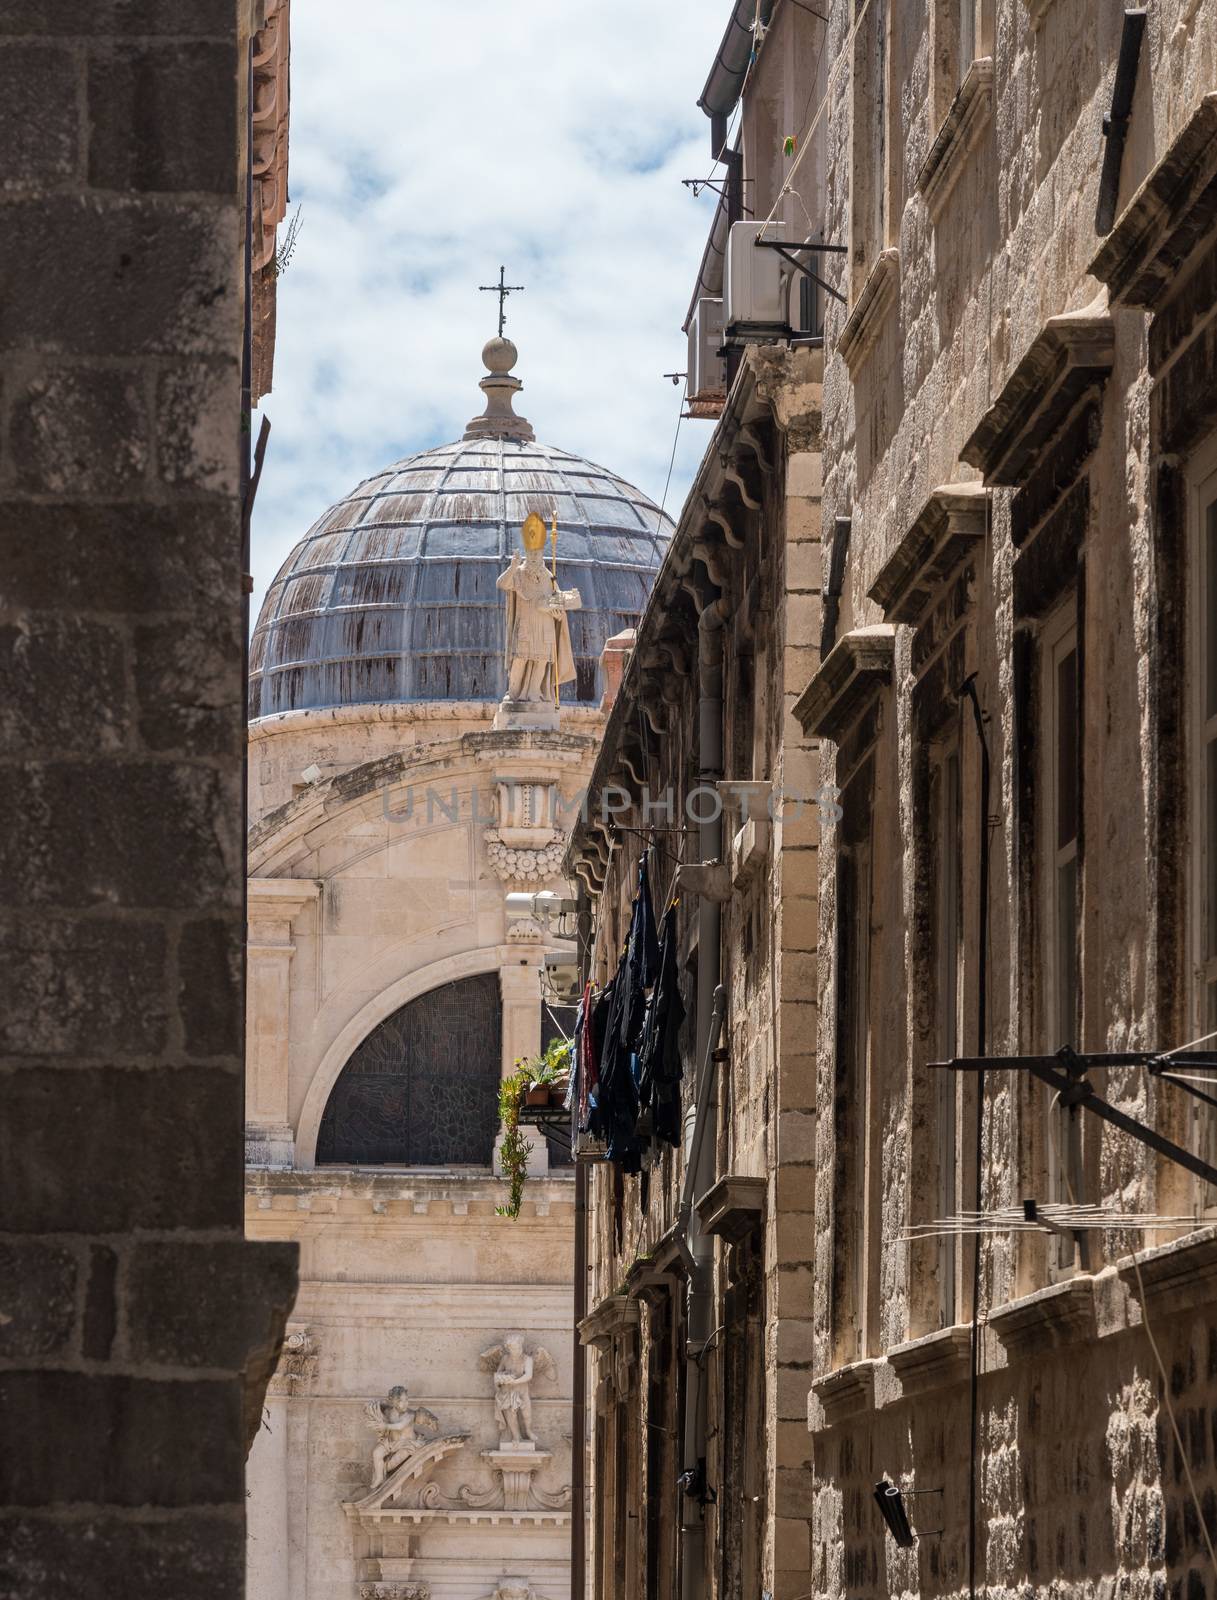 Details of roof of St Blaise church in Dubrovnik old town by steheap